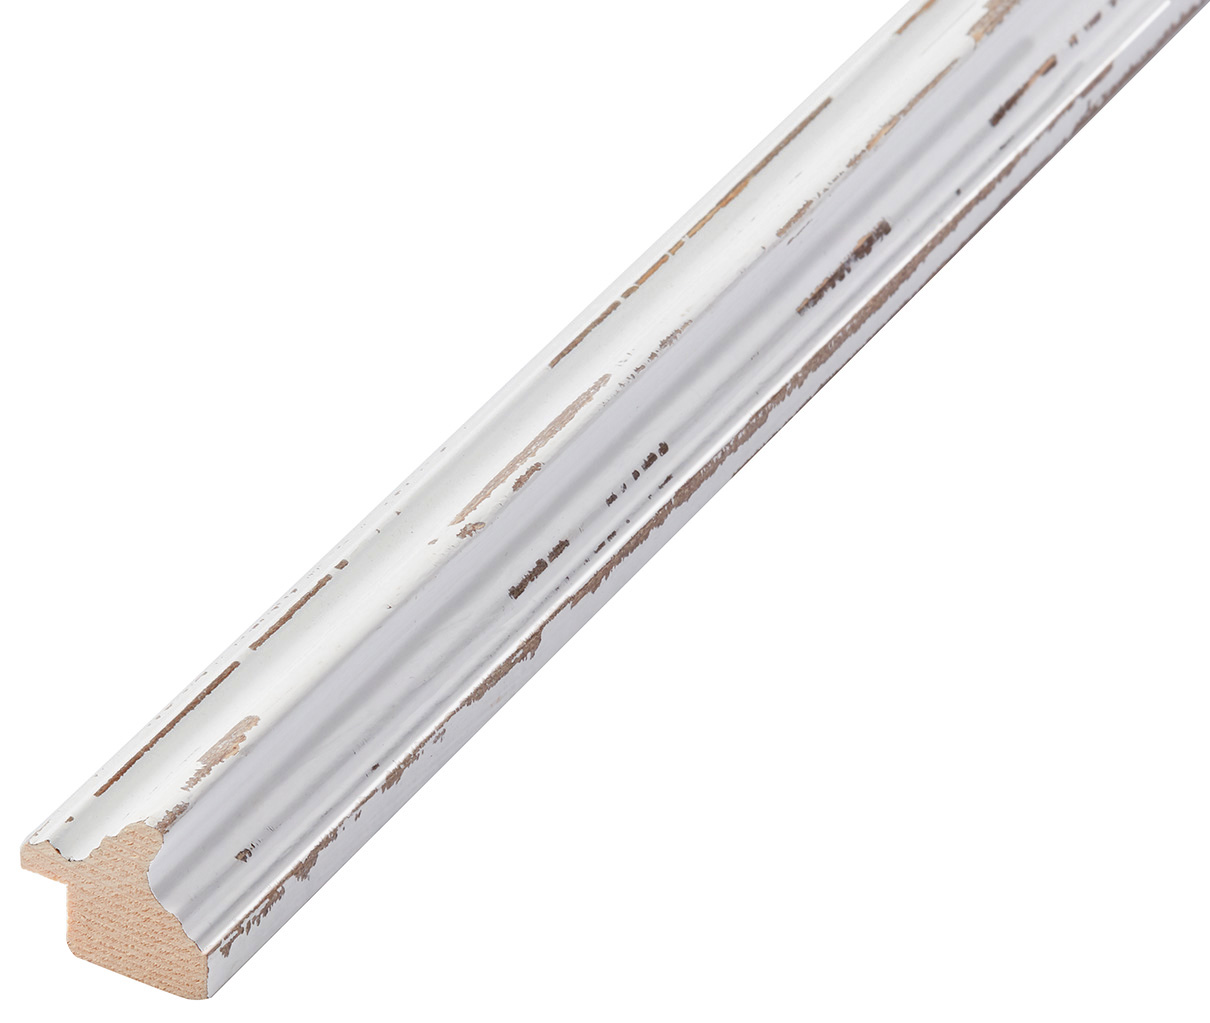 Moulding finger-jointed fir Width 24mm - White, shabby - 341BIANCO